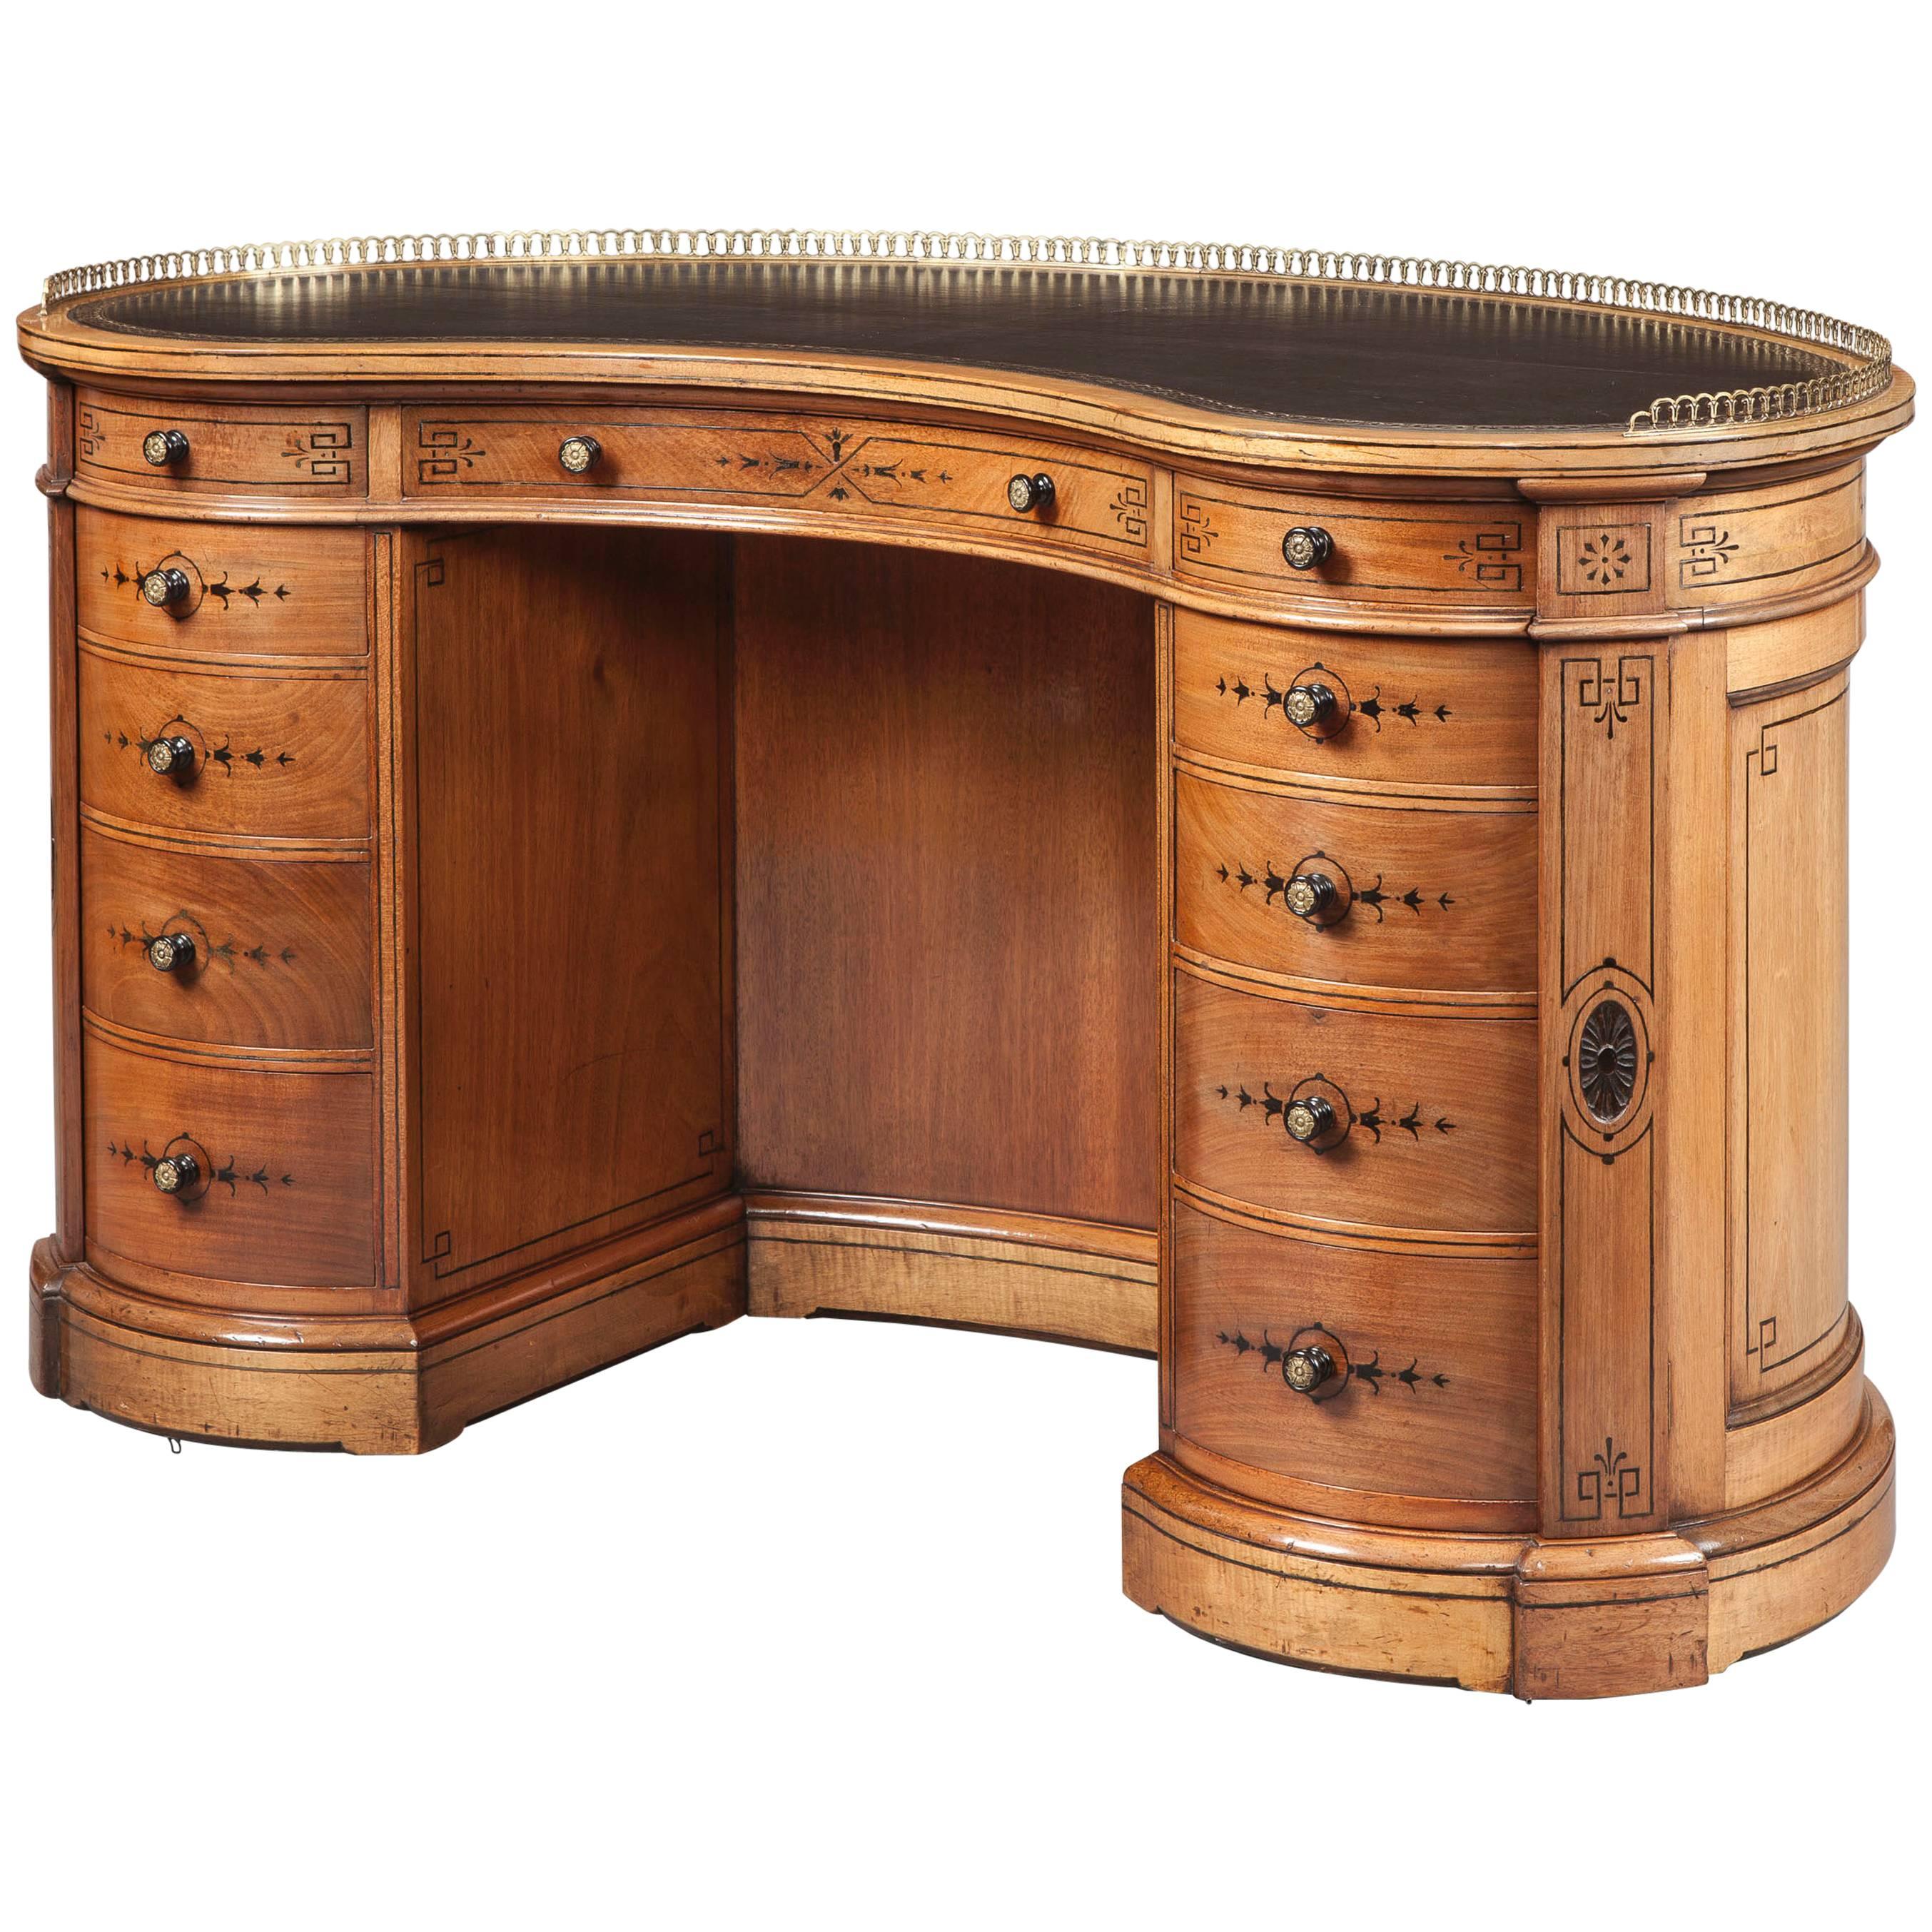 An Antique Kidney Shaped Mahogany Desk by Gillows of London and Lancaster